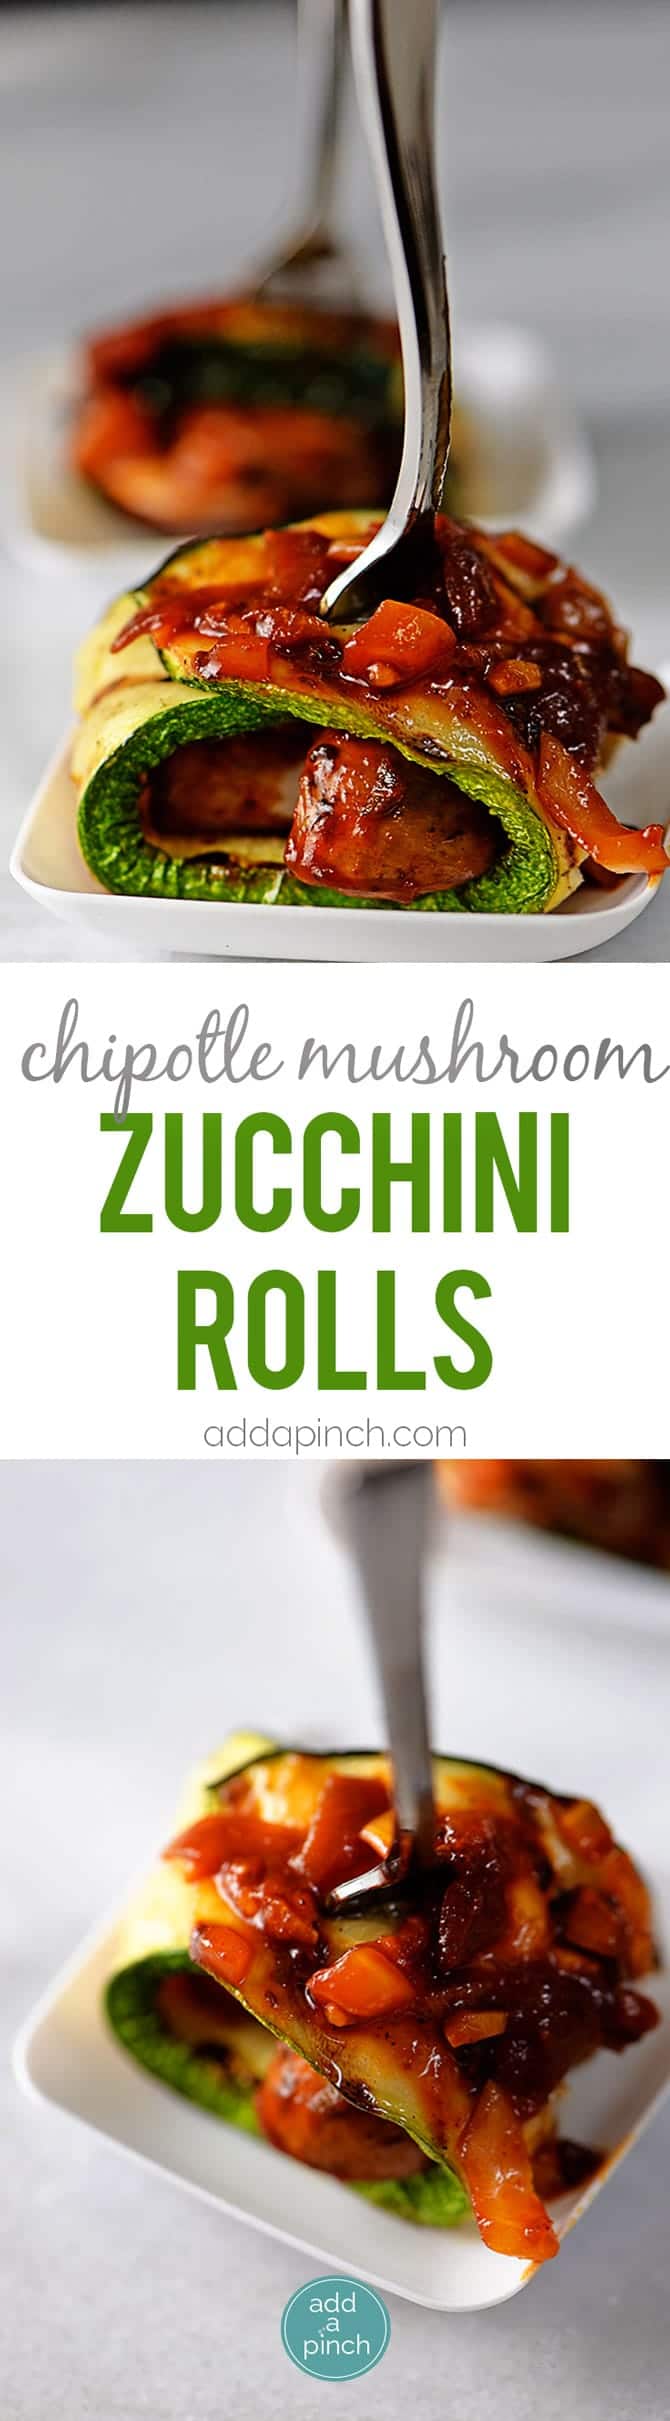 Chipotle Mushroom Zucchini Rolls Recipe - Chipotle Mushroom Zucchini Rolls make an easy appetizer recipe. A flavorful dish, these zucchini rolls are a great meatless, grain-free option to serve. // addapinch.com